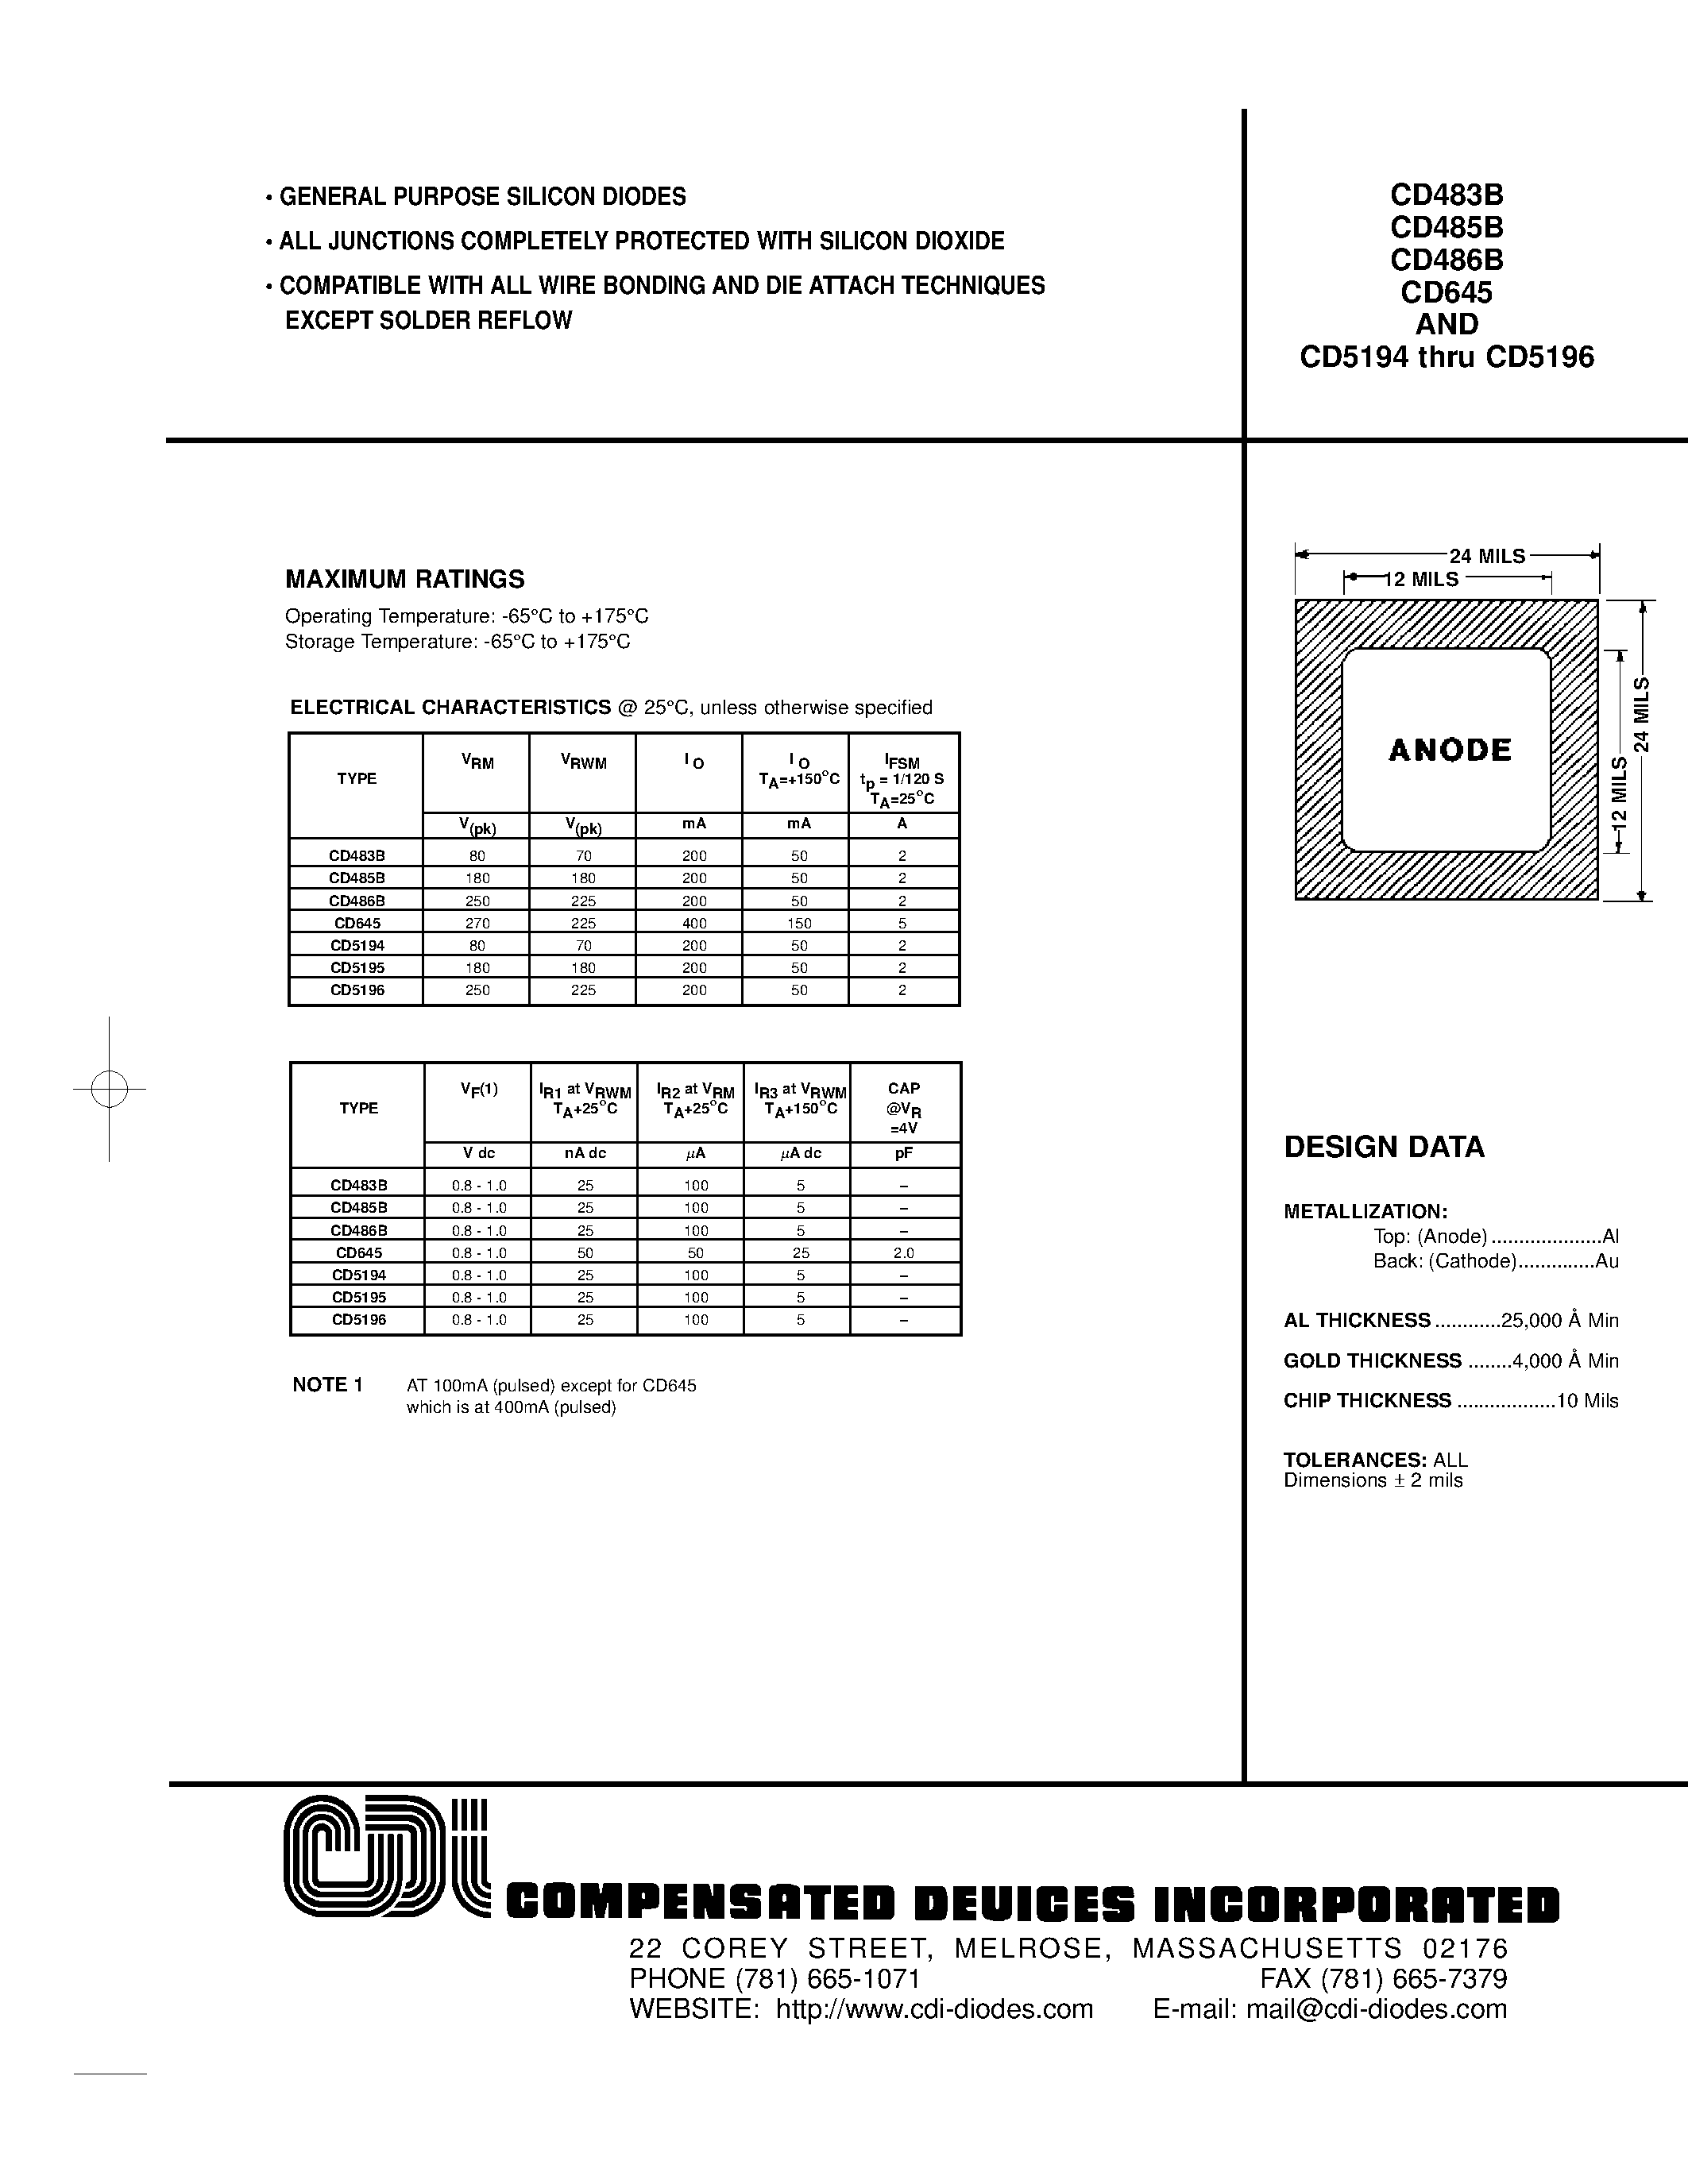 Даташит CD645-GENERAL PURPOSE SILICON DIODES страница 1